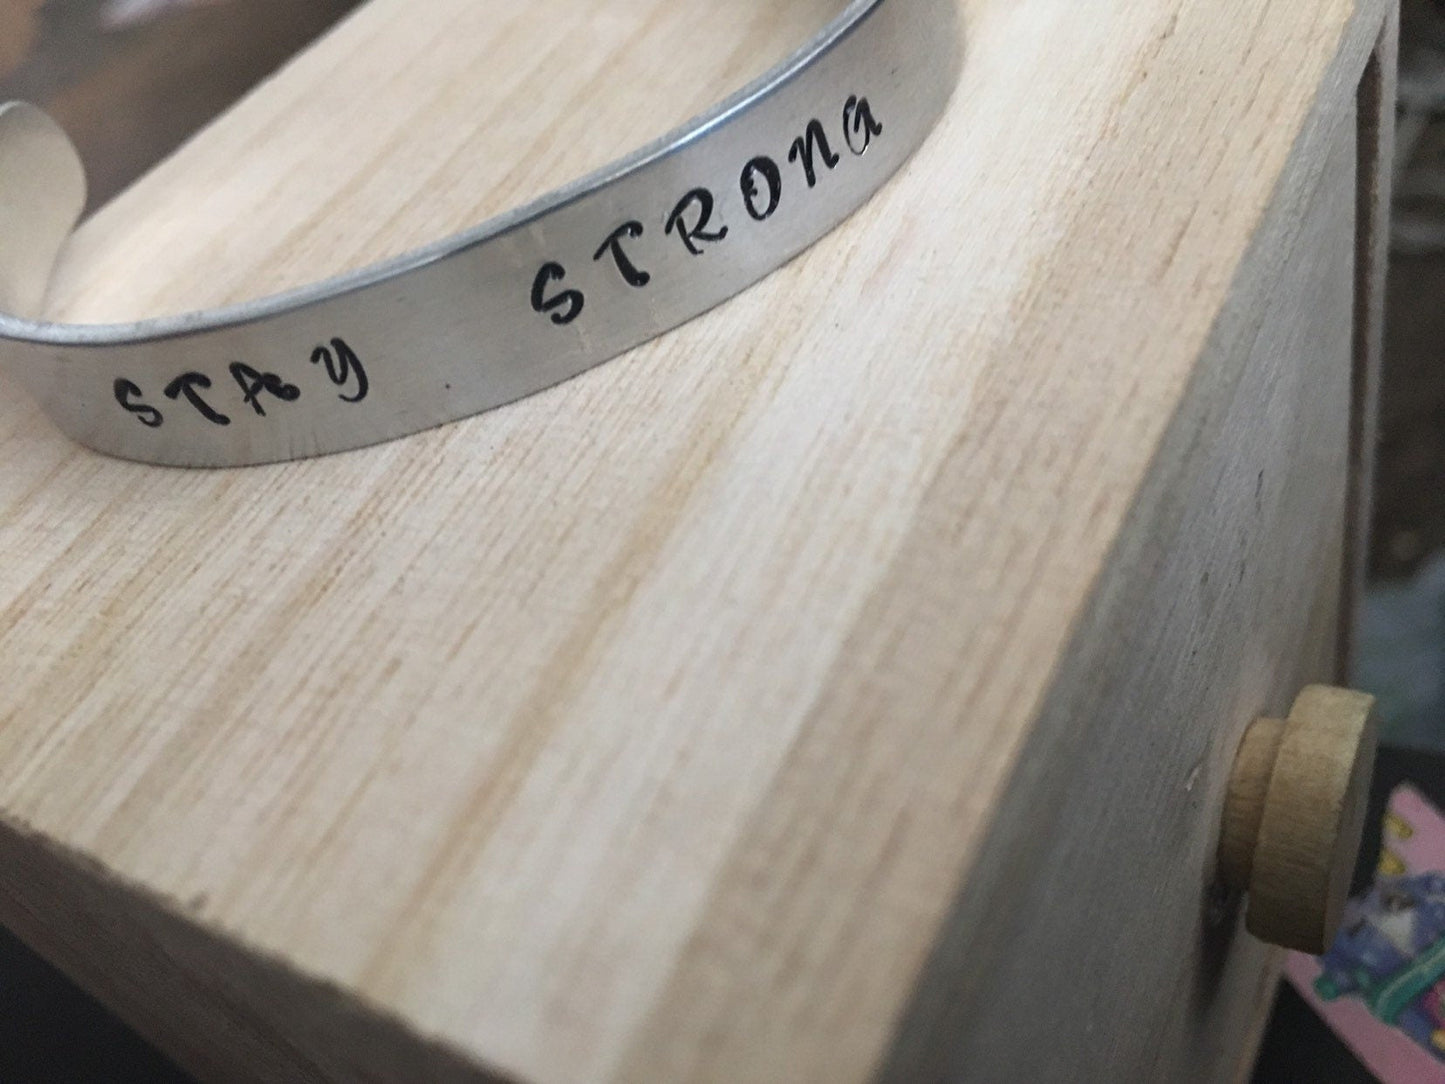 Stay strong handmade bracelet customize your own